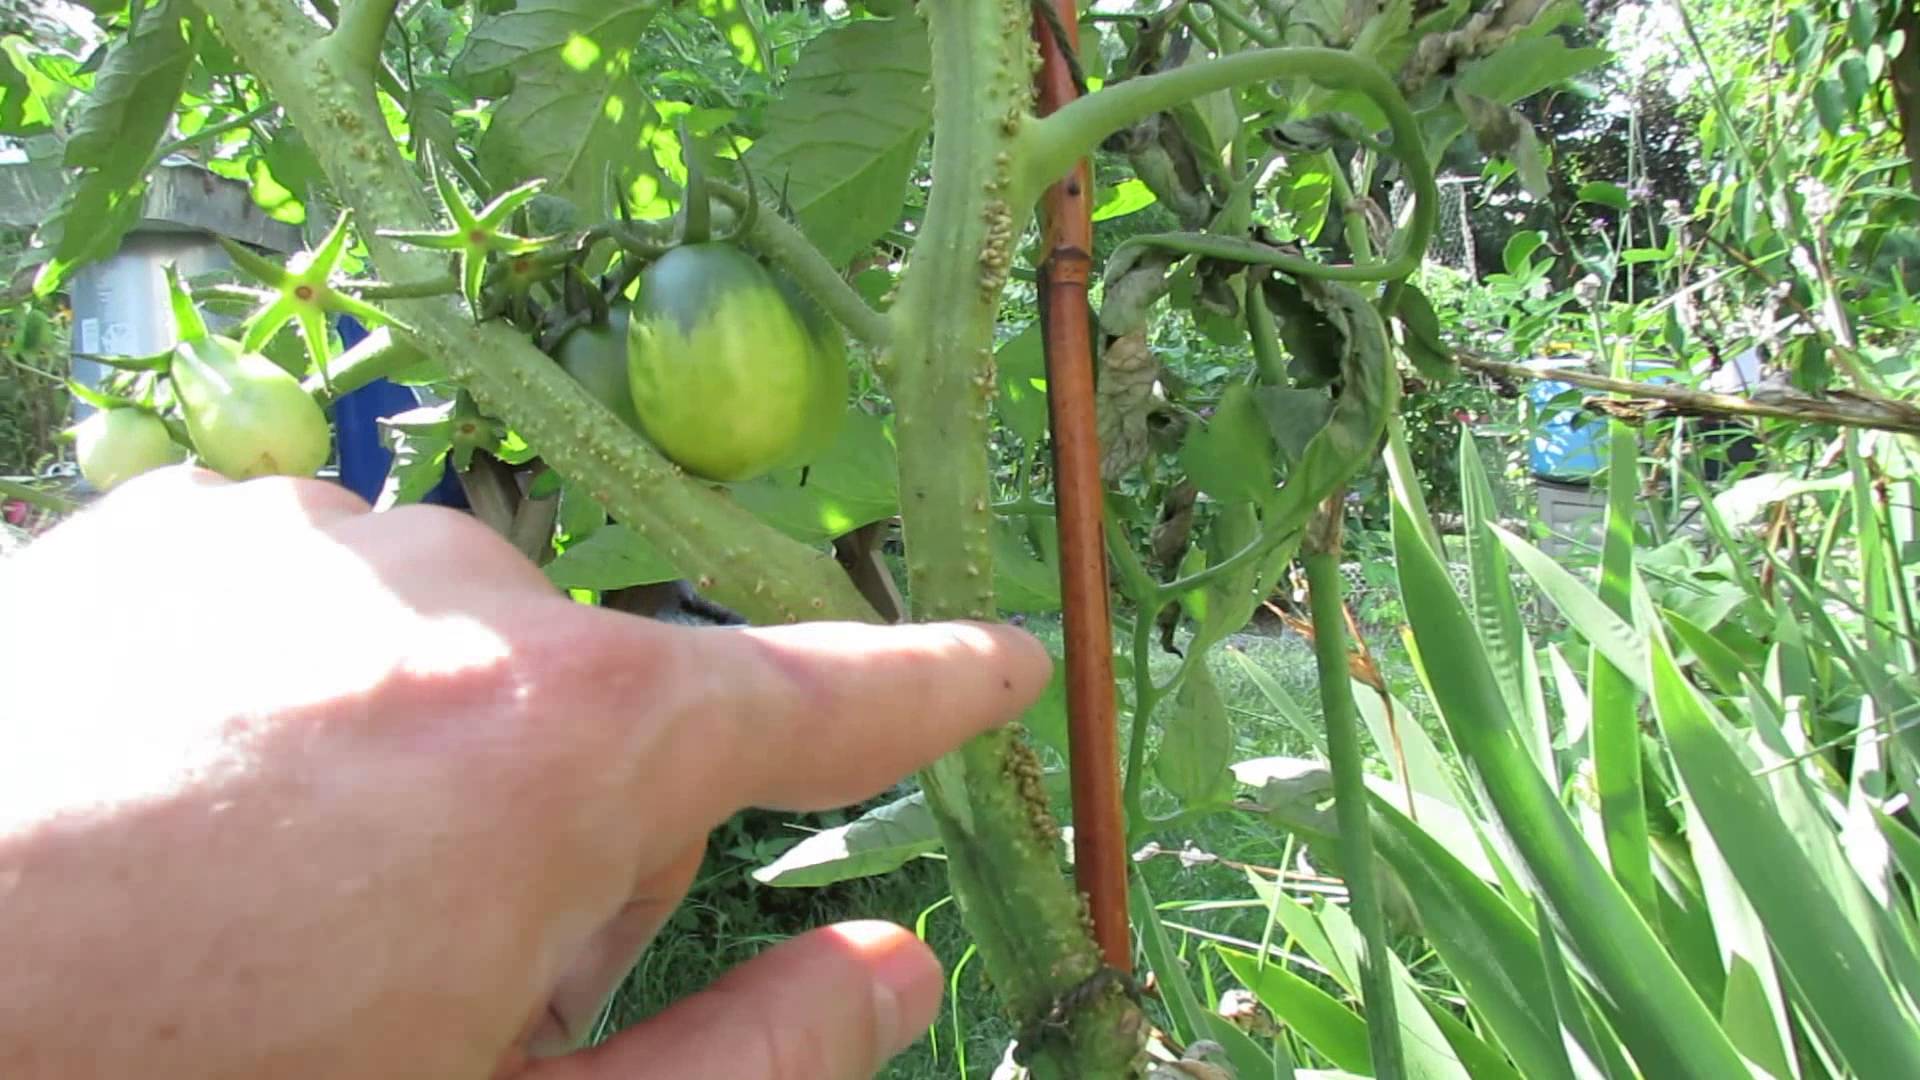 What are Those Bumps on My Tomato Plant/Stems? - The Rusted Garden ...